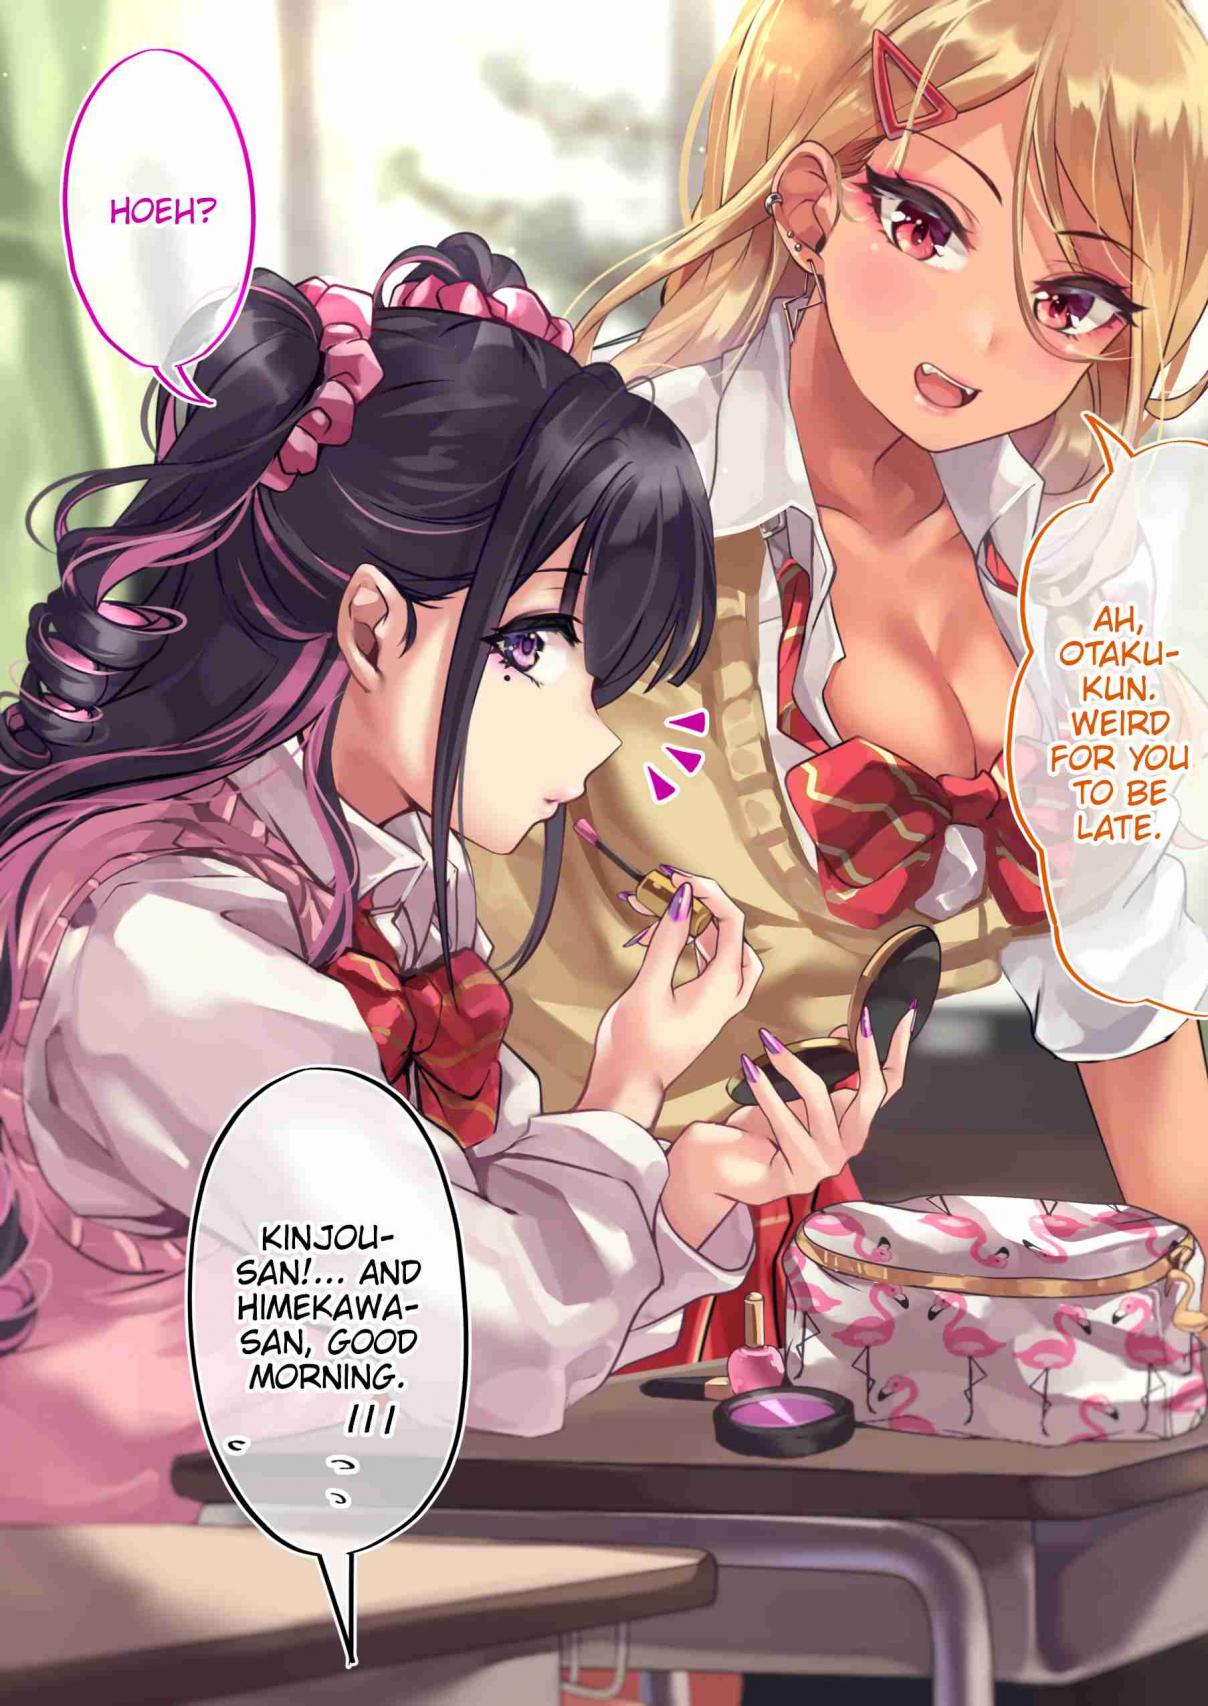 The Story of an Otaku and a Gyaru Falling in Love 68 Affection Level: --%